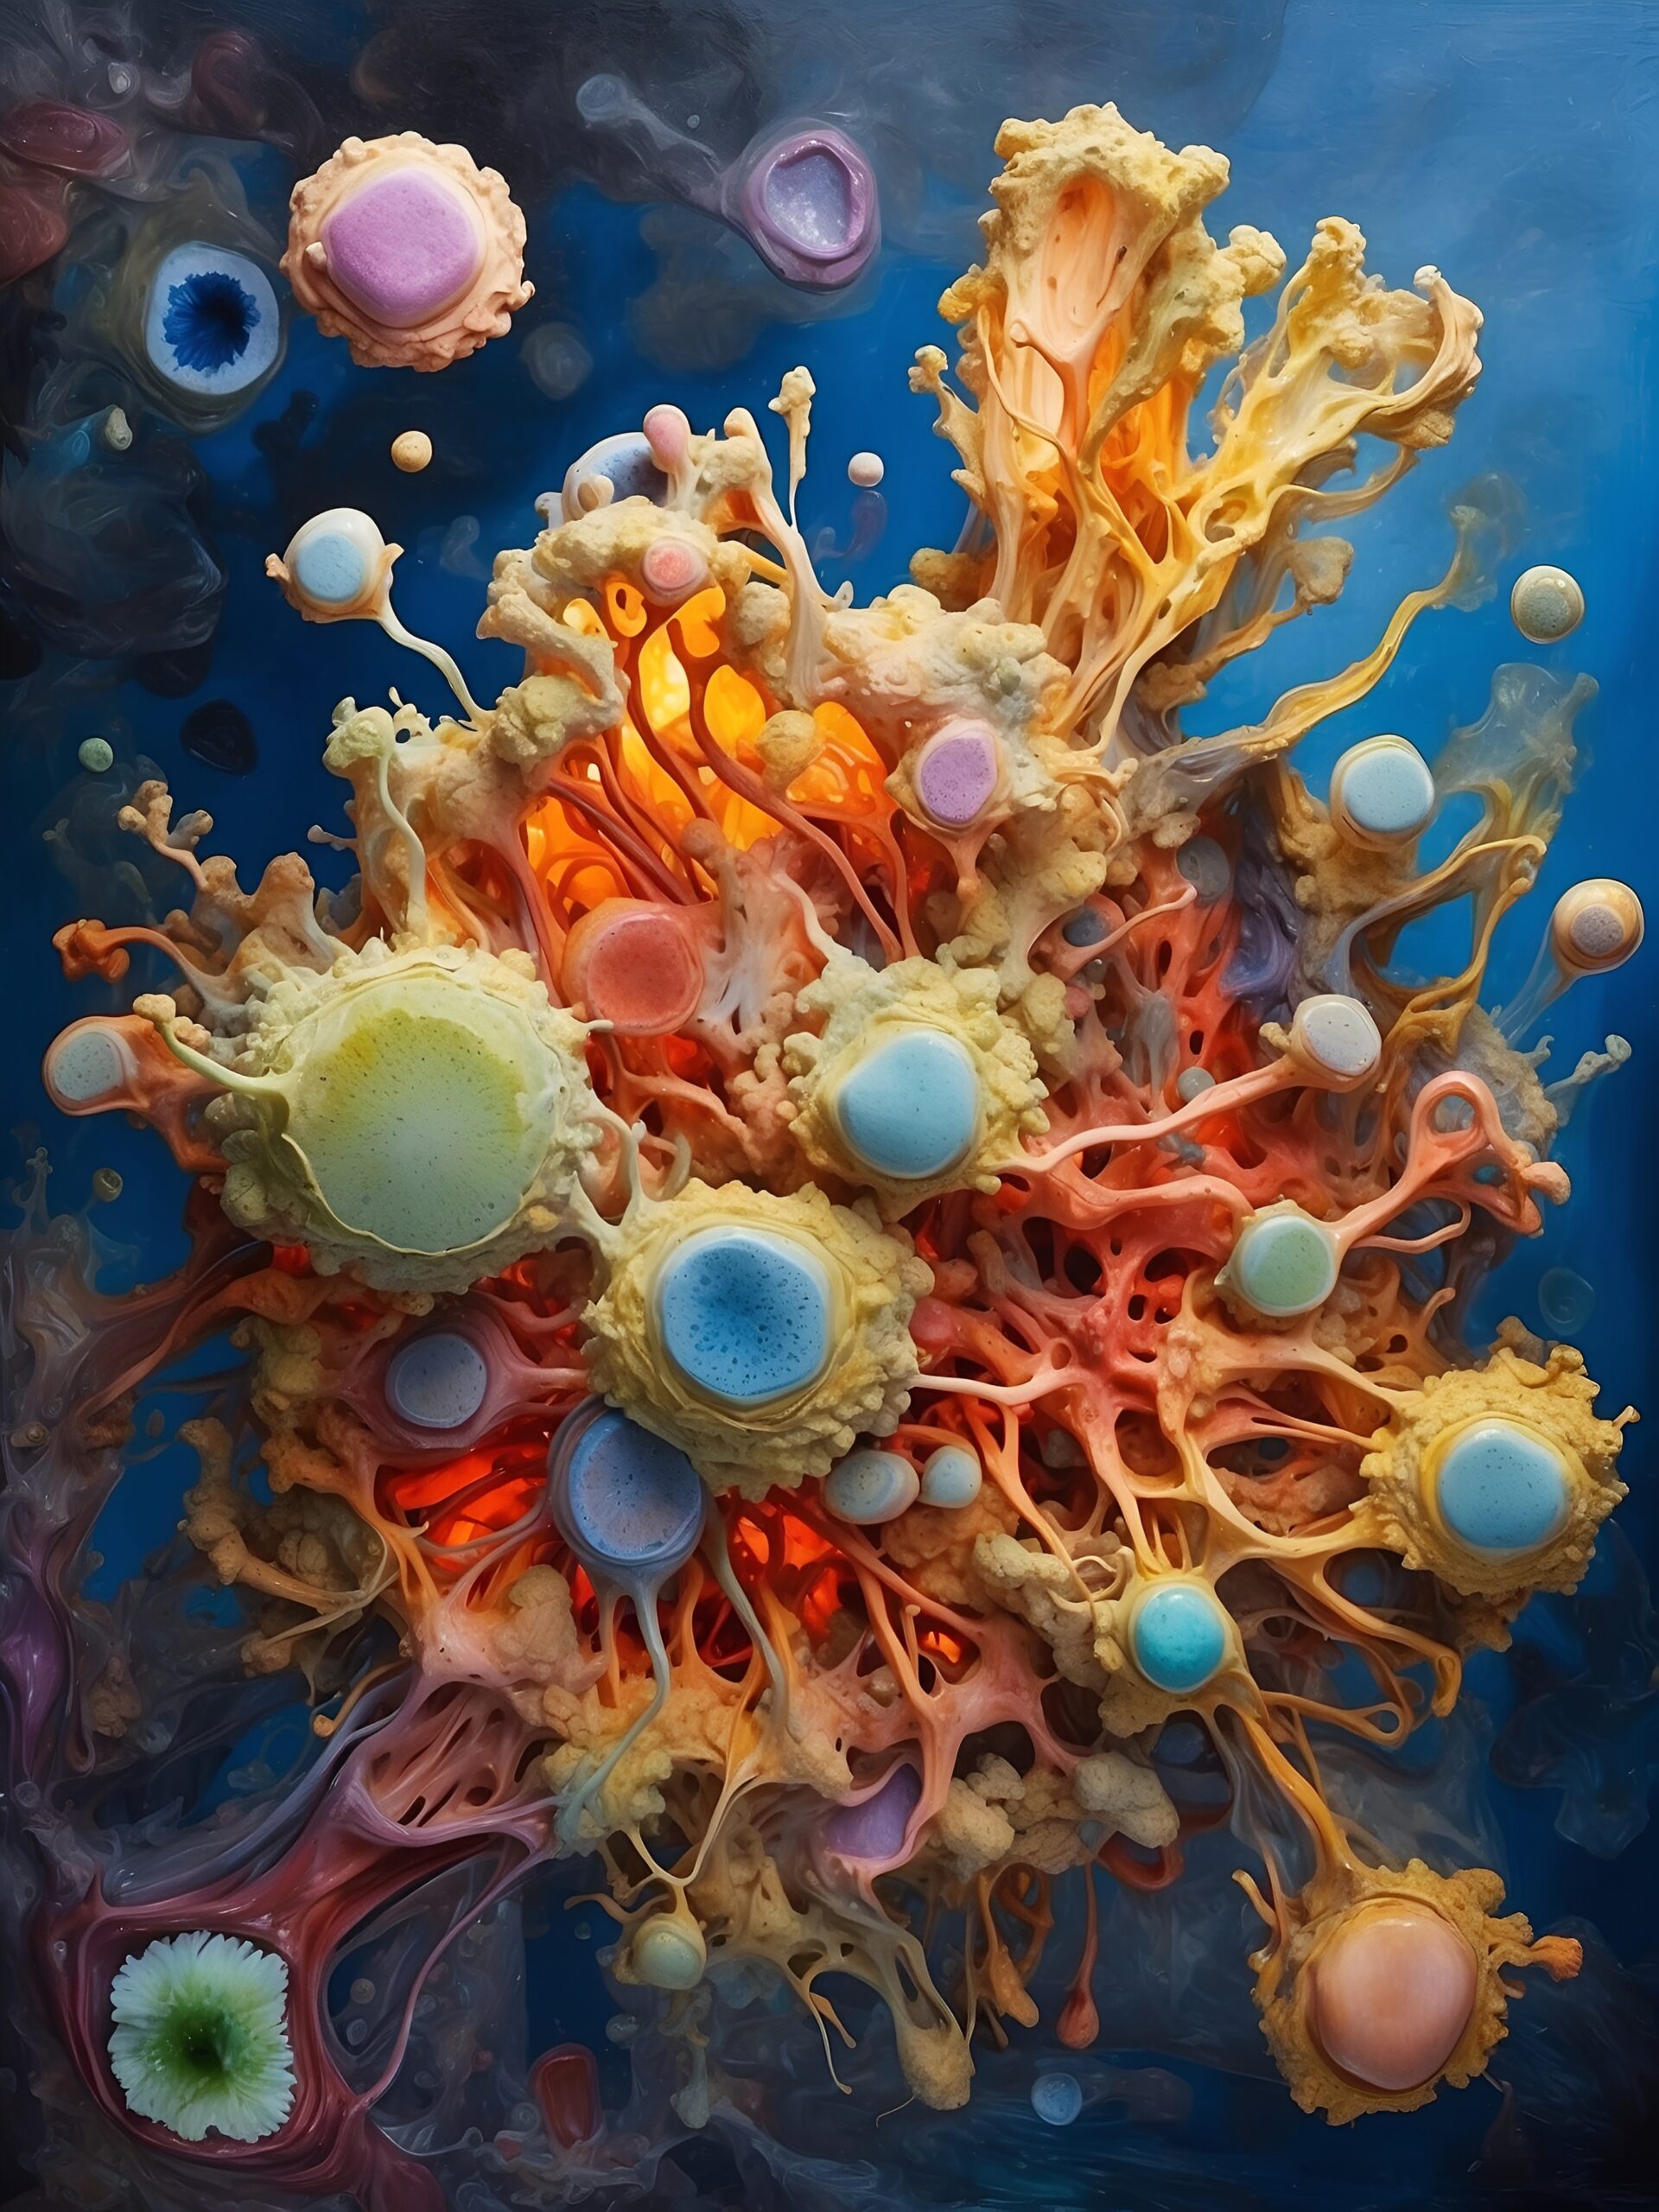 Default epic full detailed oil painting picture of a bacteria 0 34f6e6b5 aaec 45f7 ada1 e9cde1ea17f2 0